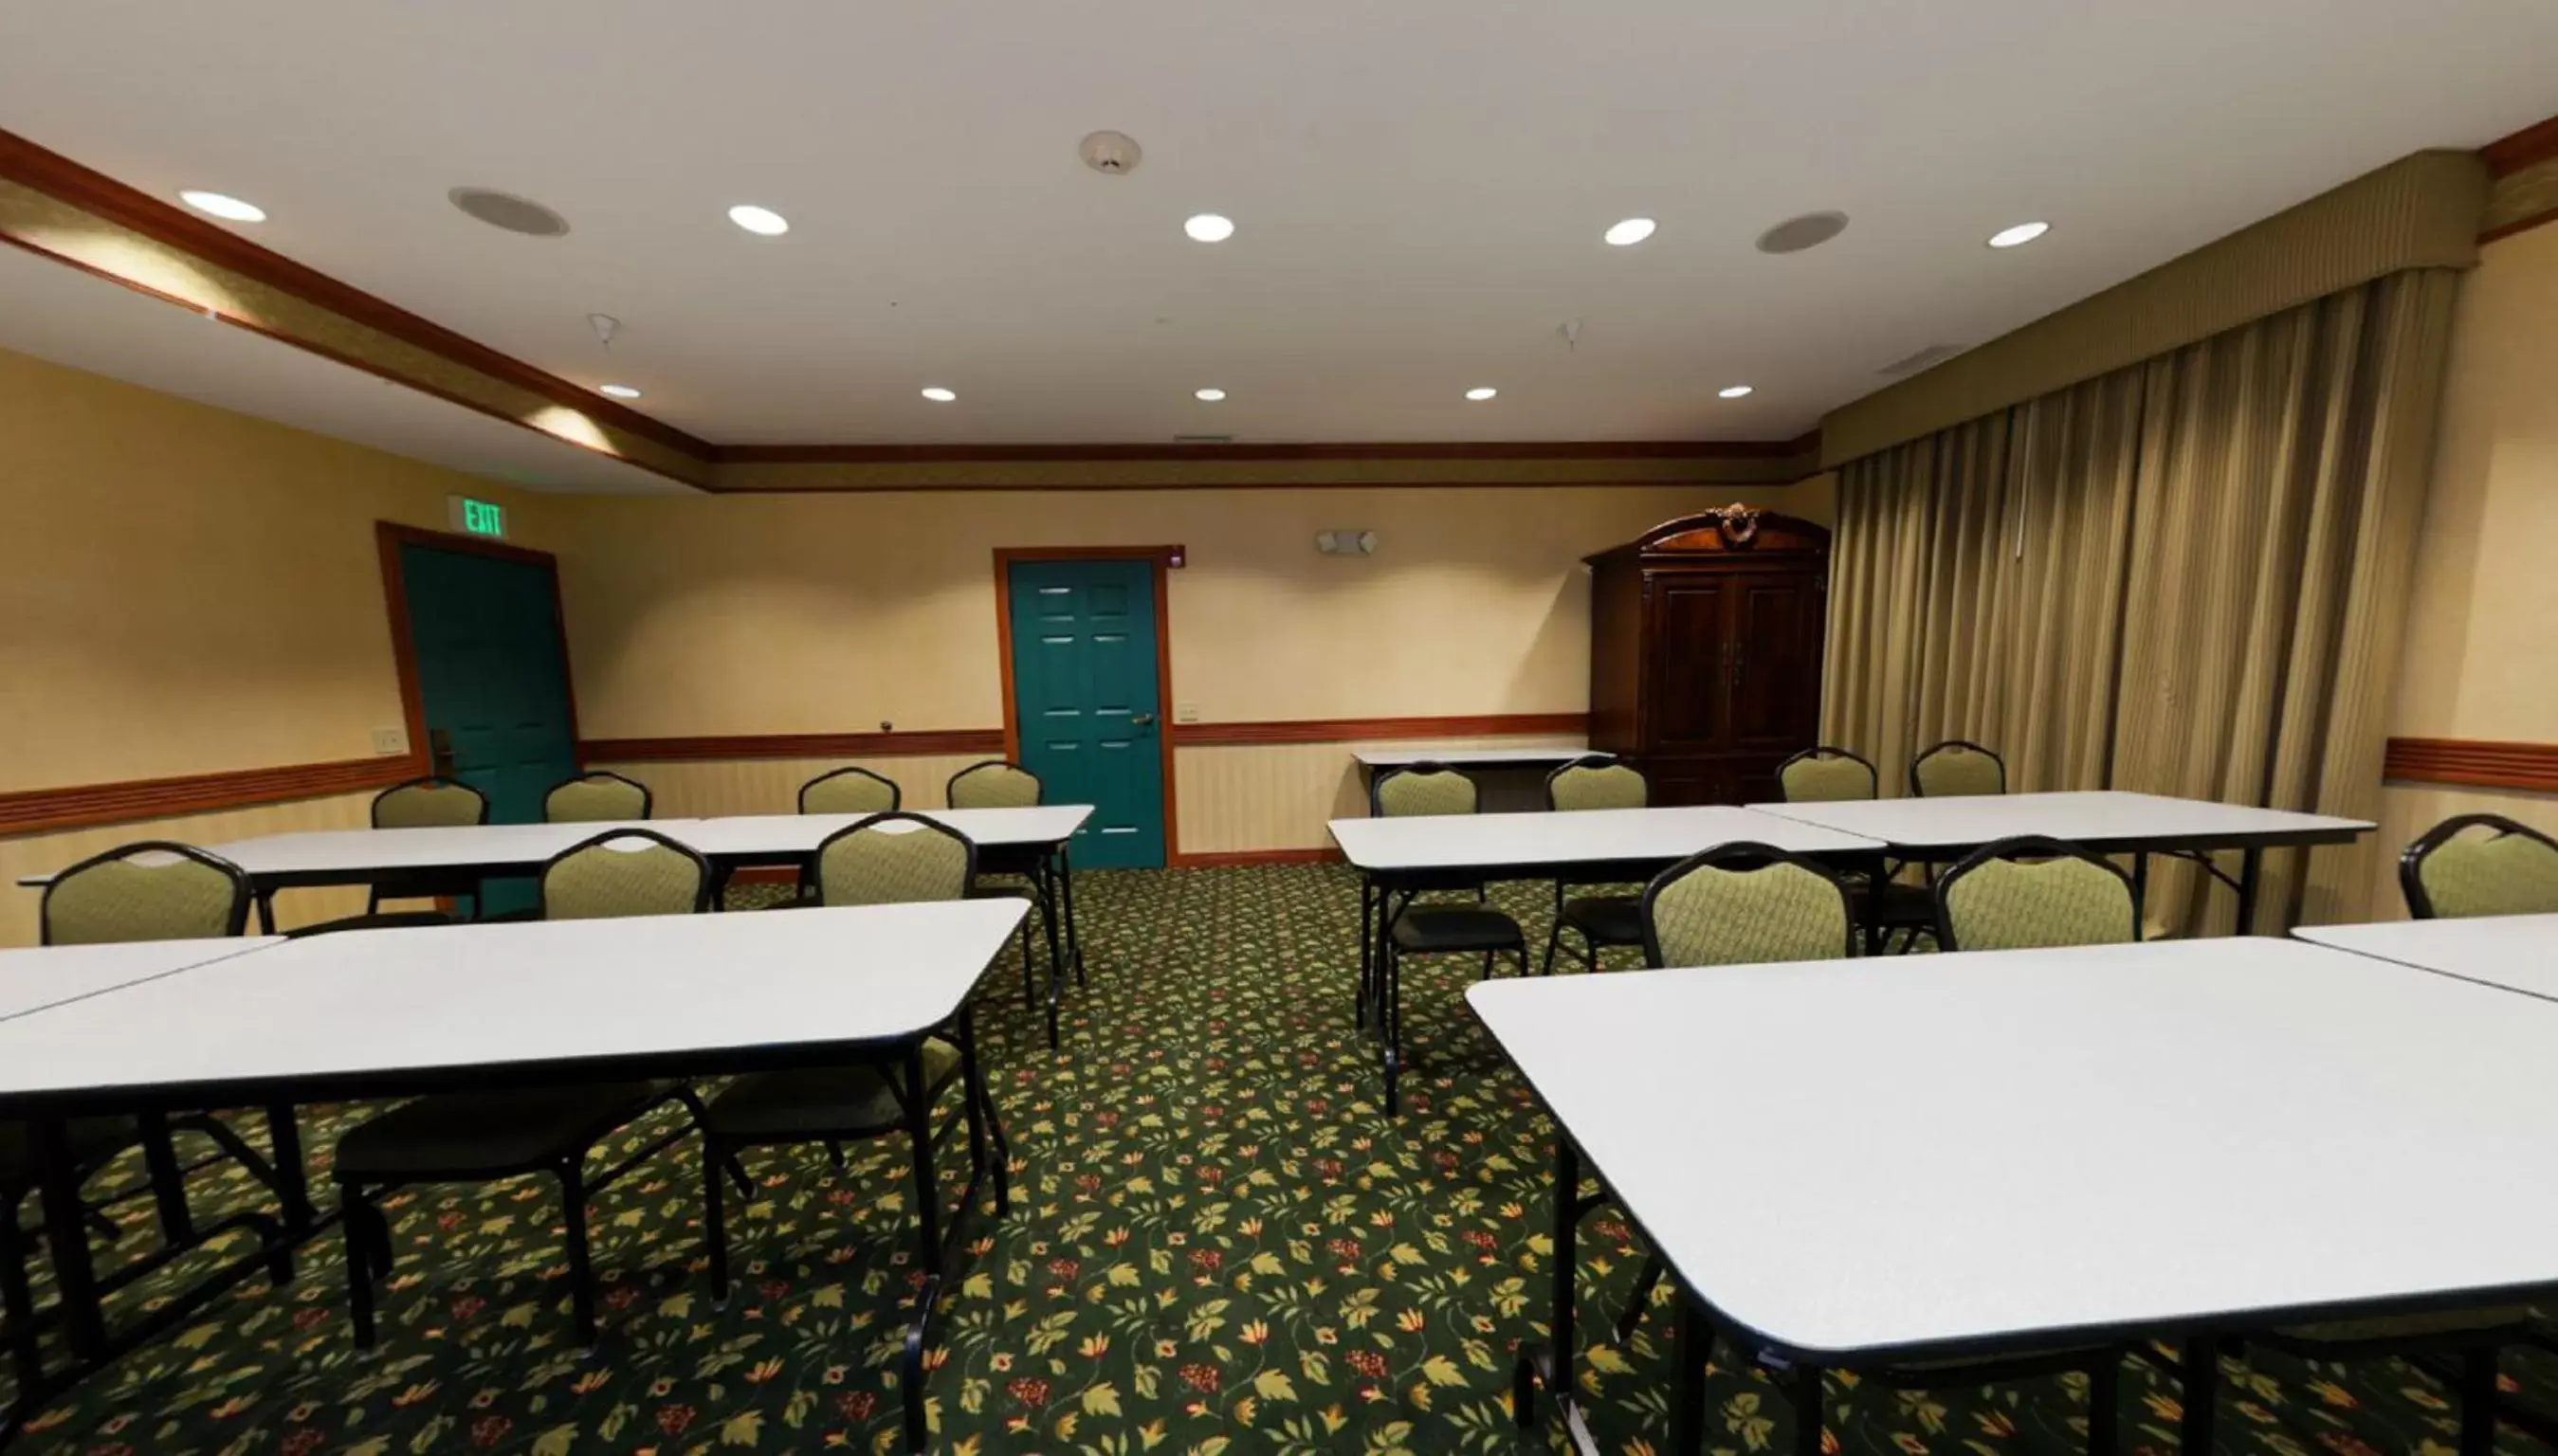 Banquet/Function facilities in Country Inn & Suites by Radisson, Michigan City, IN